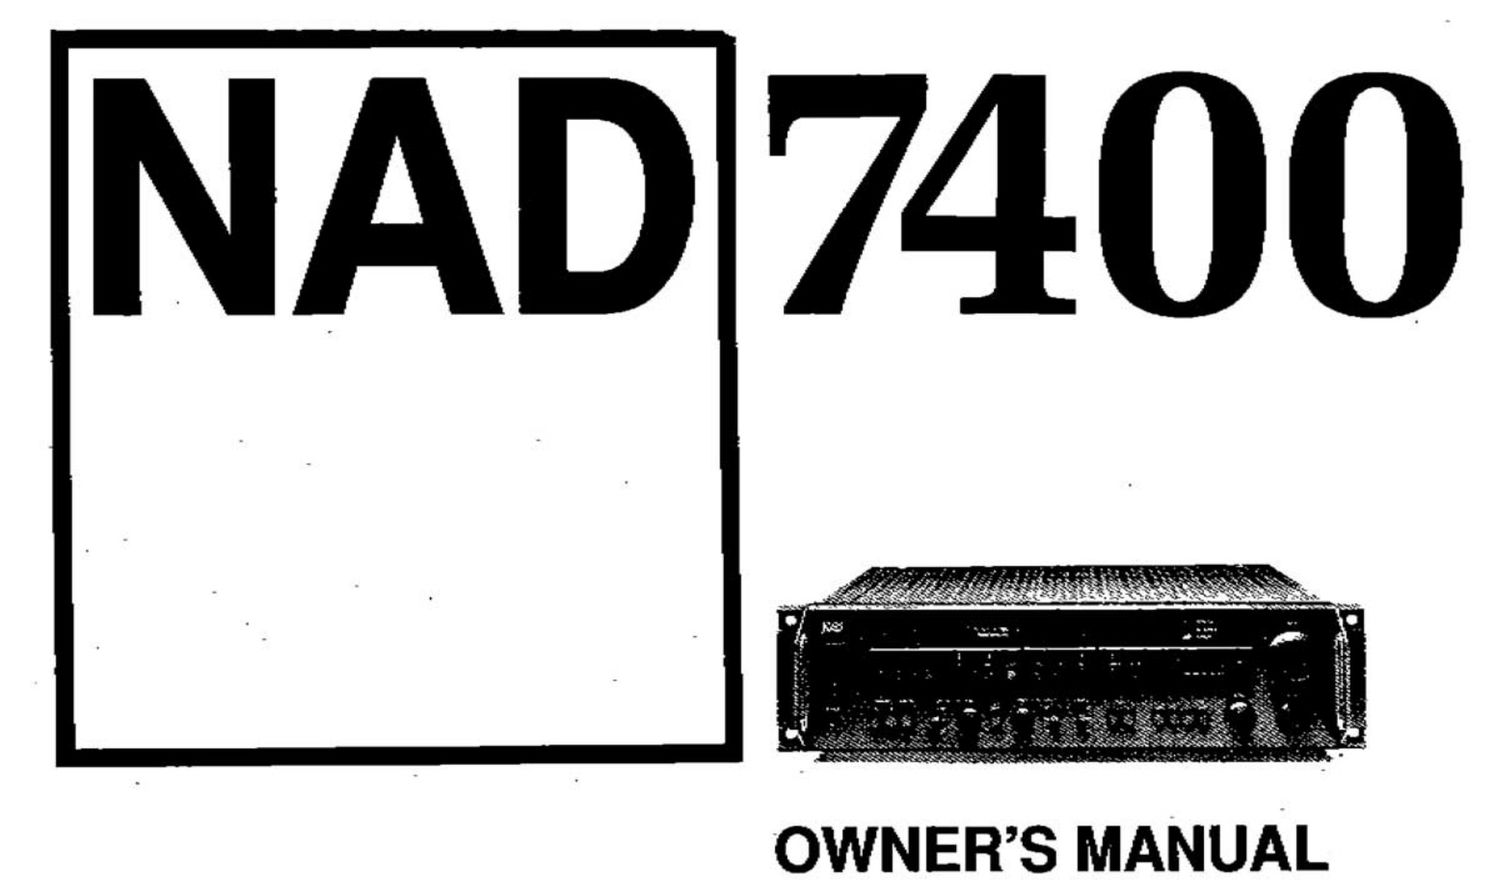 Nad 7400 Owners Manual